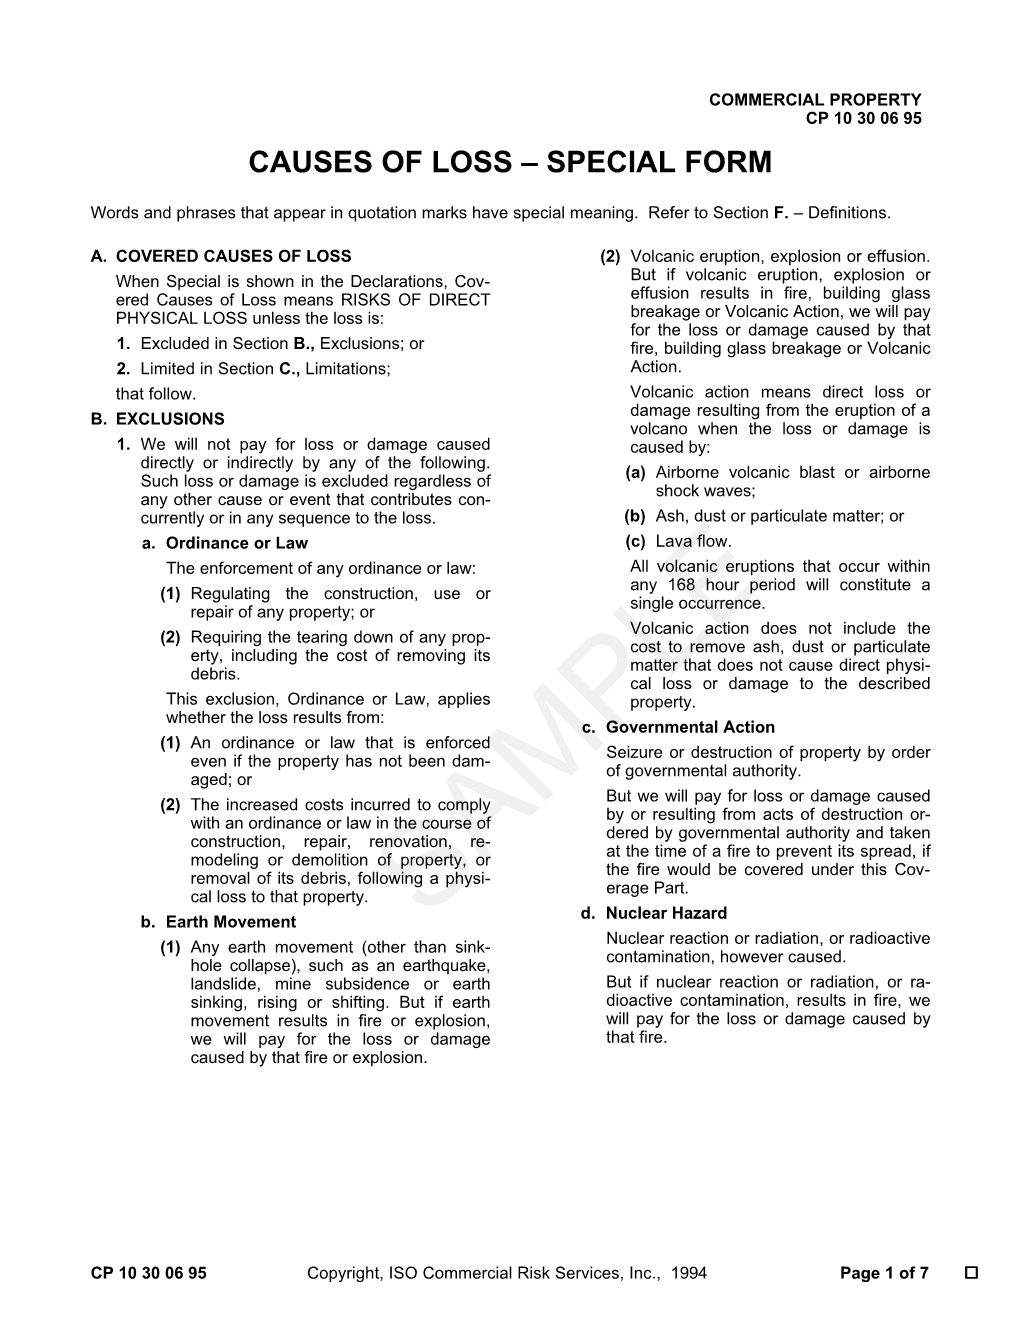 Causes of Loss – Special Form